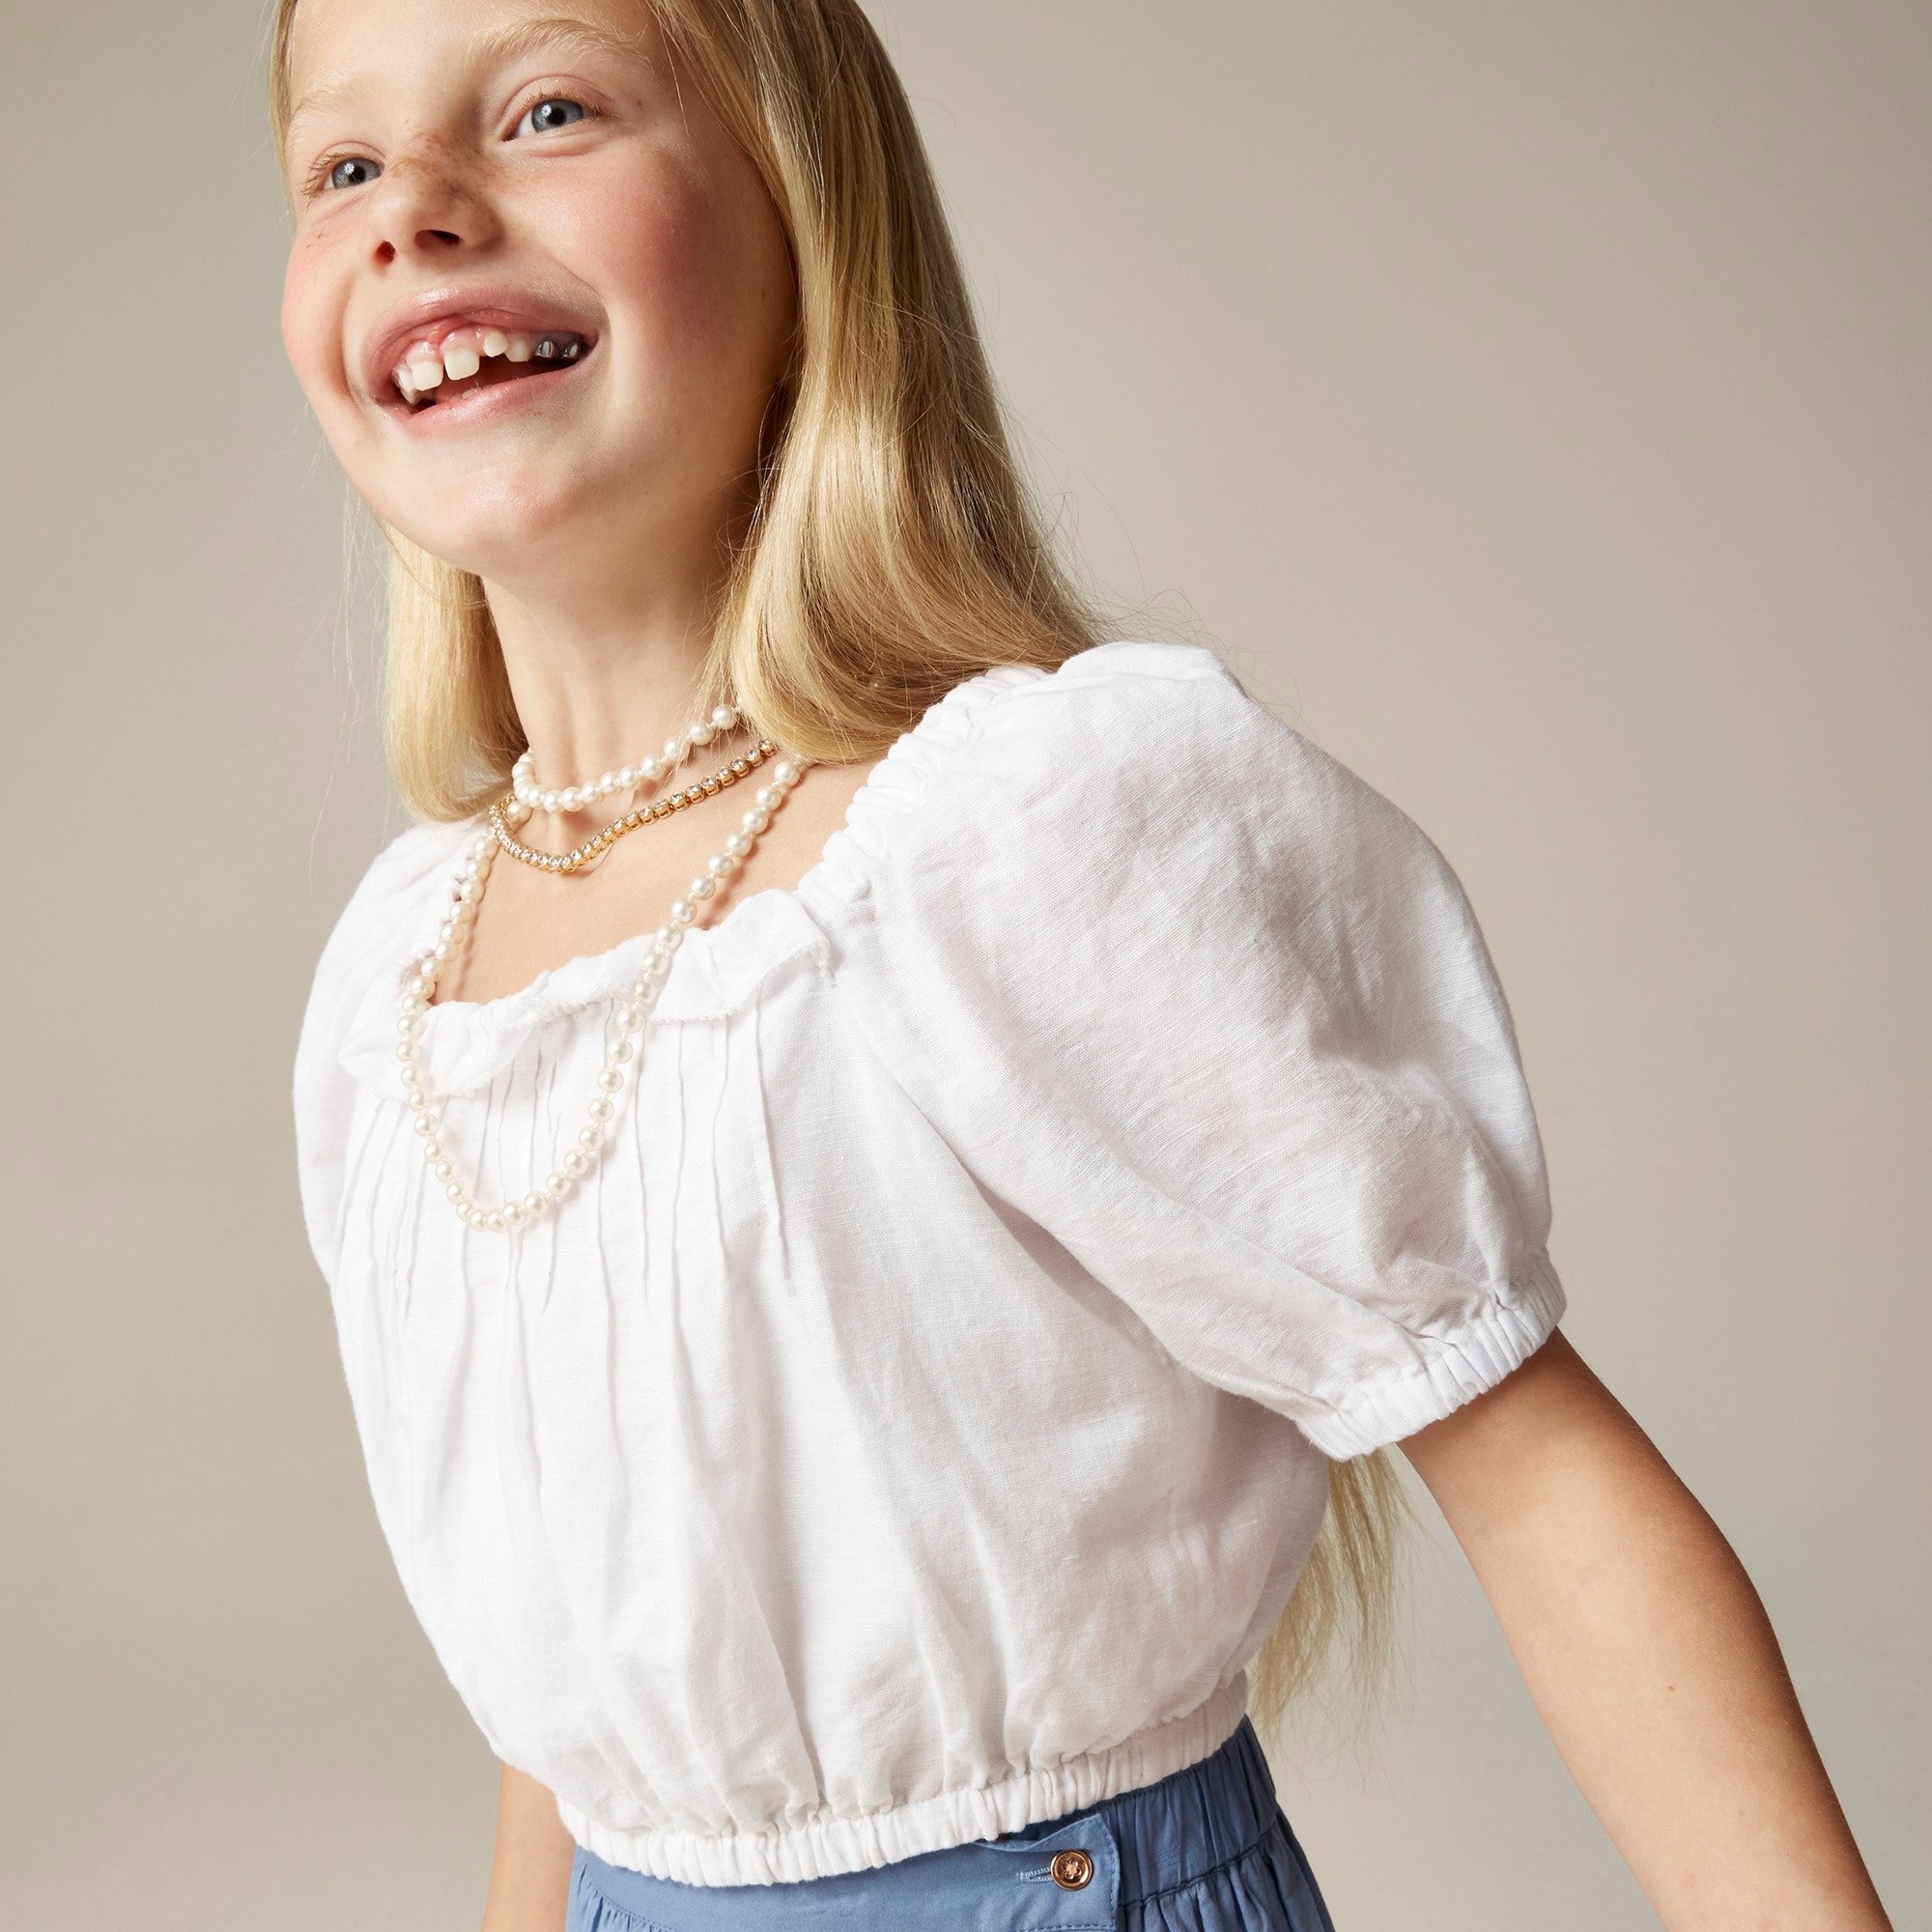  Girls' squareneck cropped top in linen-cotton blend